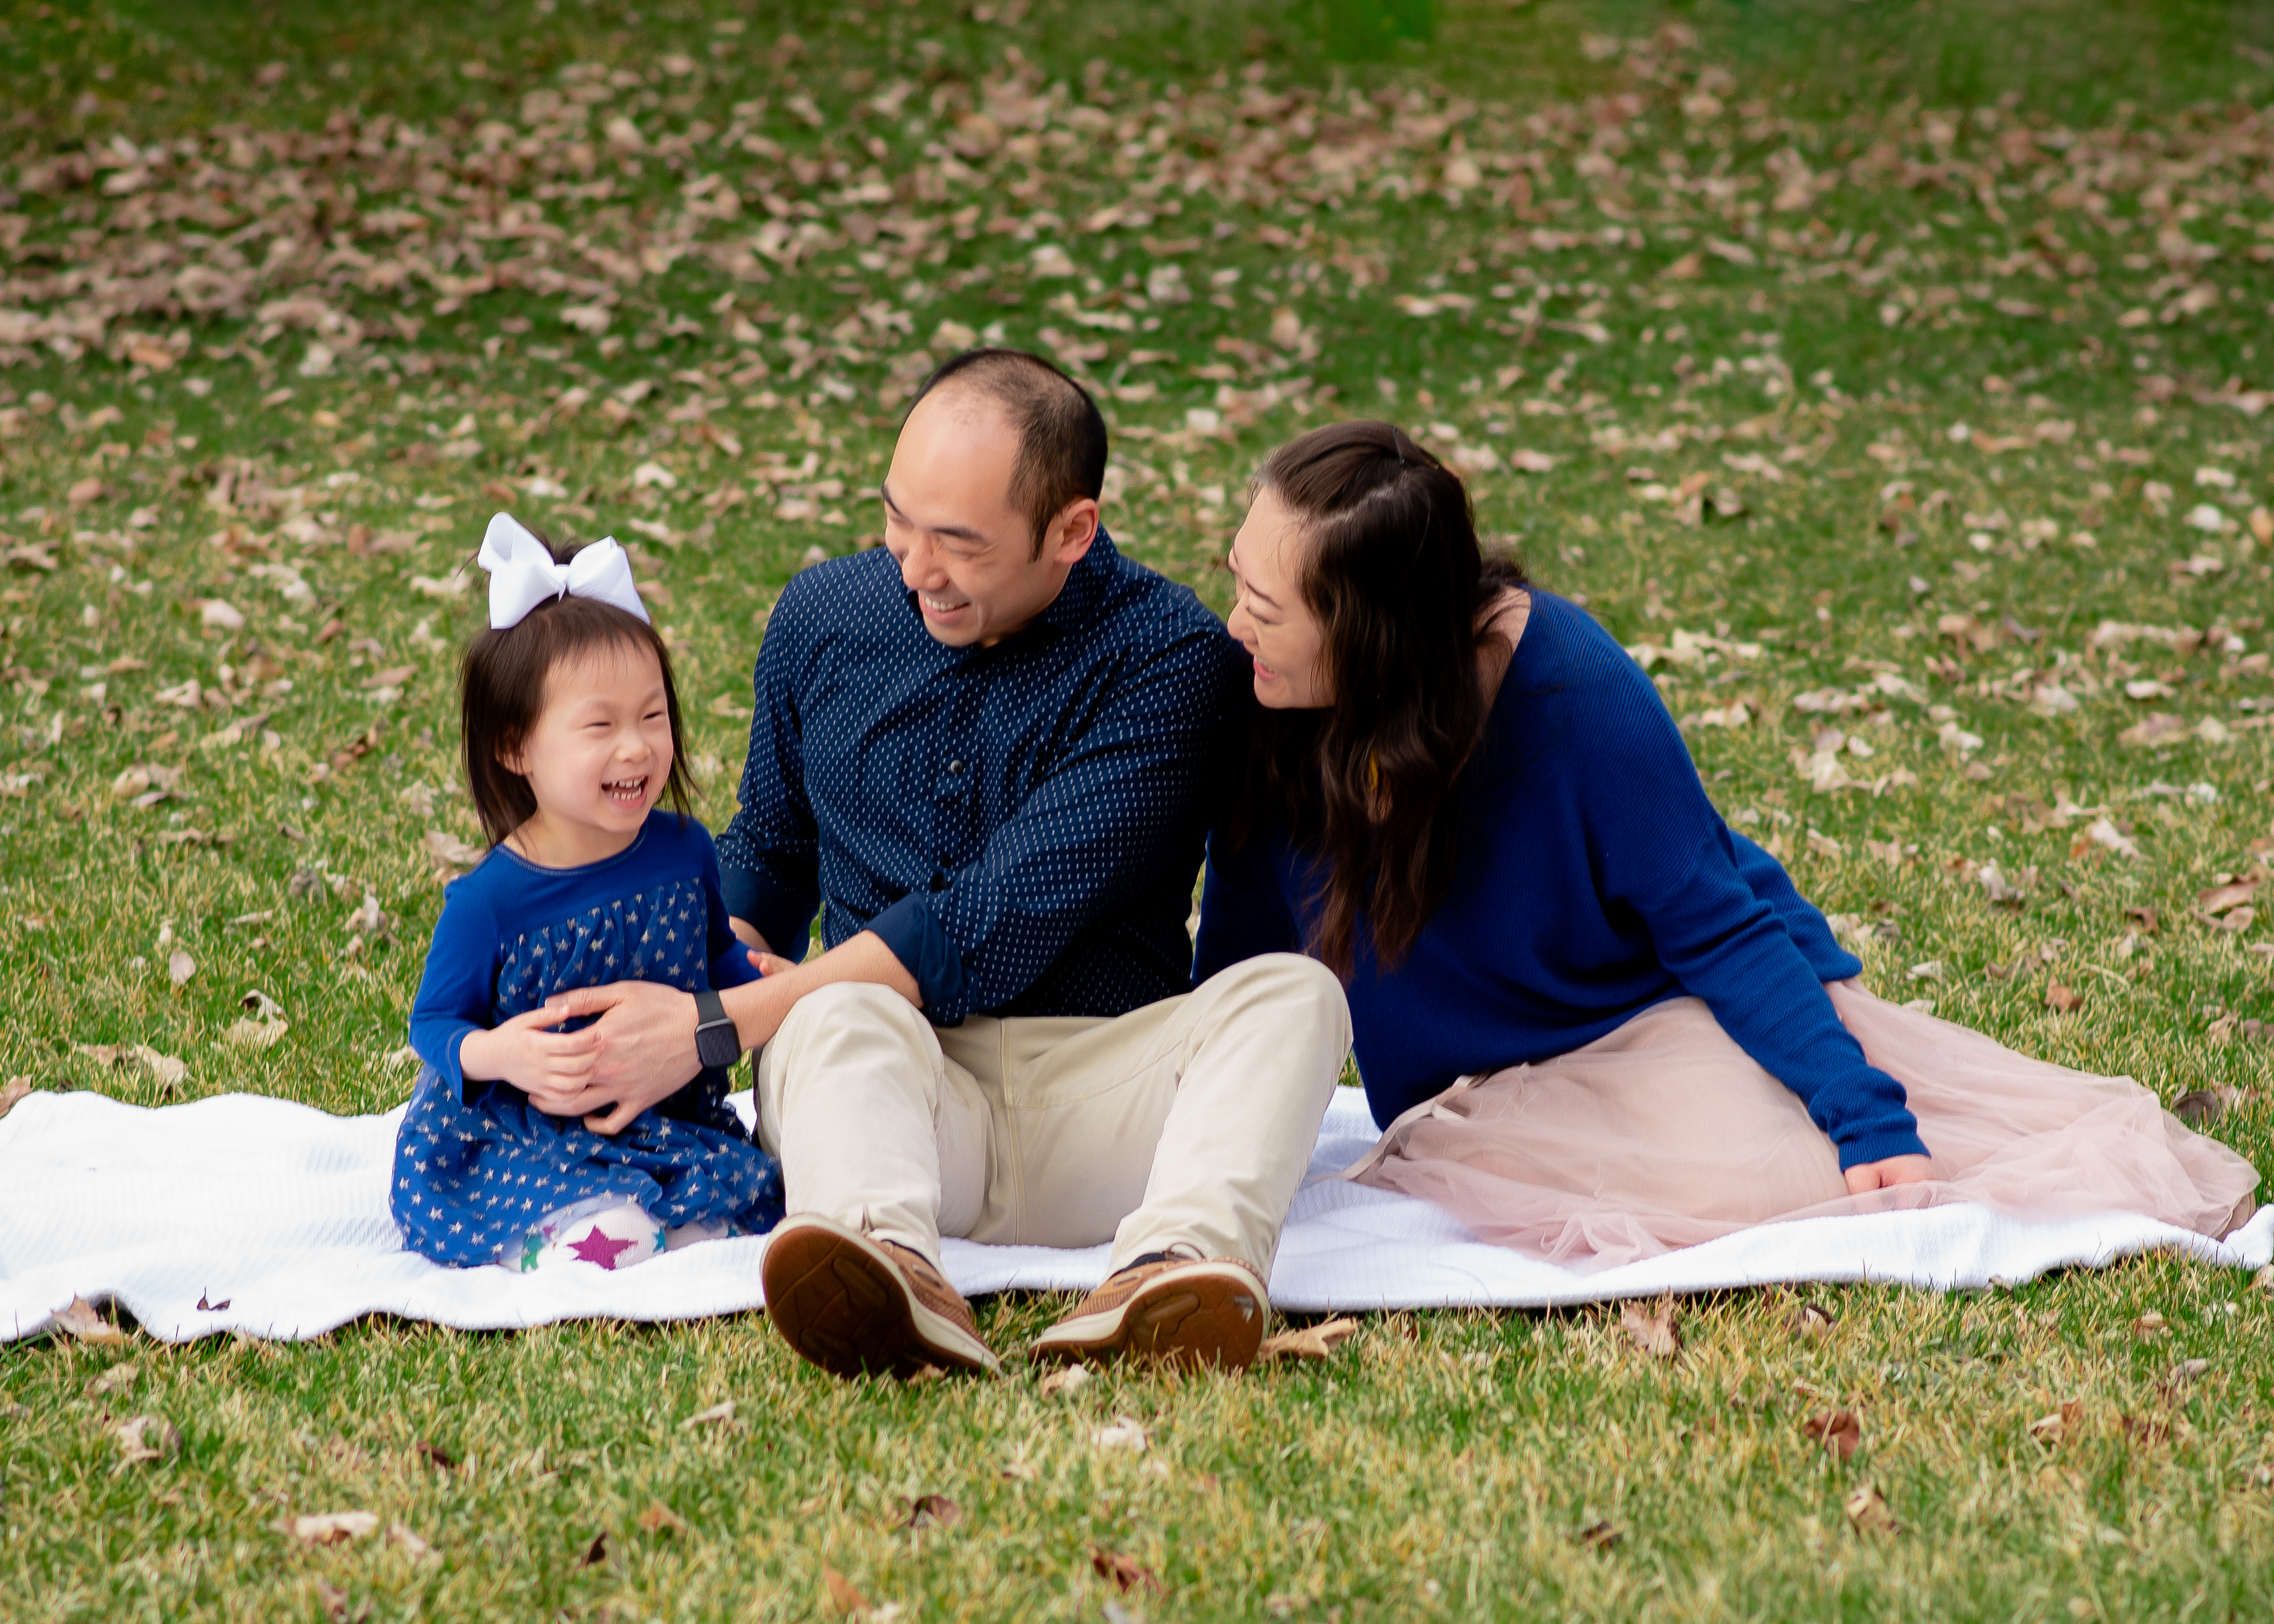 Family session - not a mini session